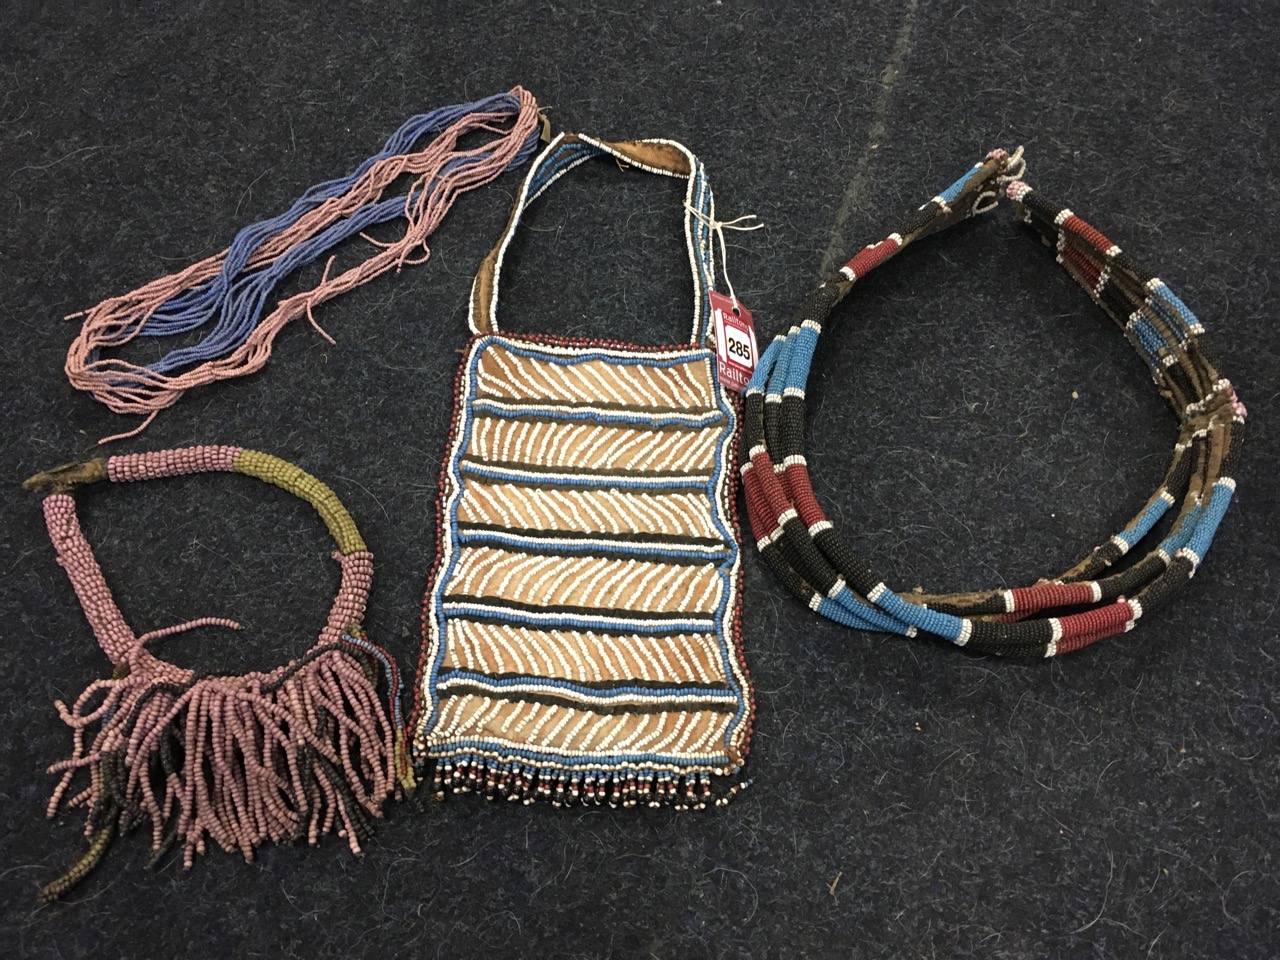 Miscellaneous tribal Zulu beadwork pieces - a necklace with tassels, a bag, a six cord belt (?), and